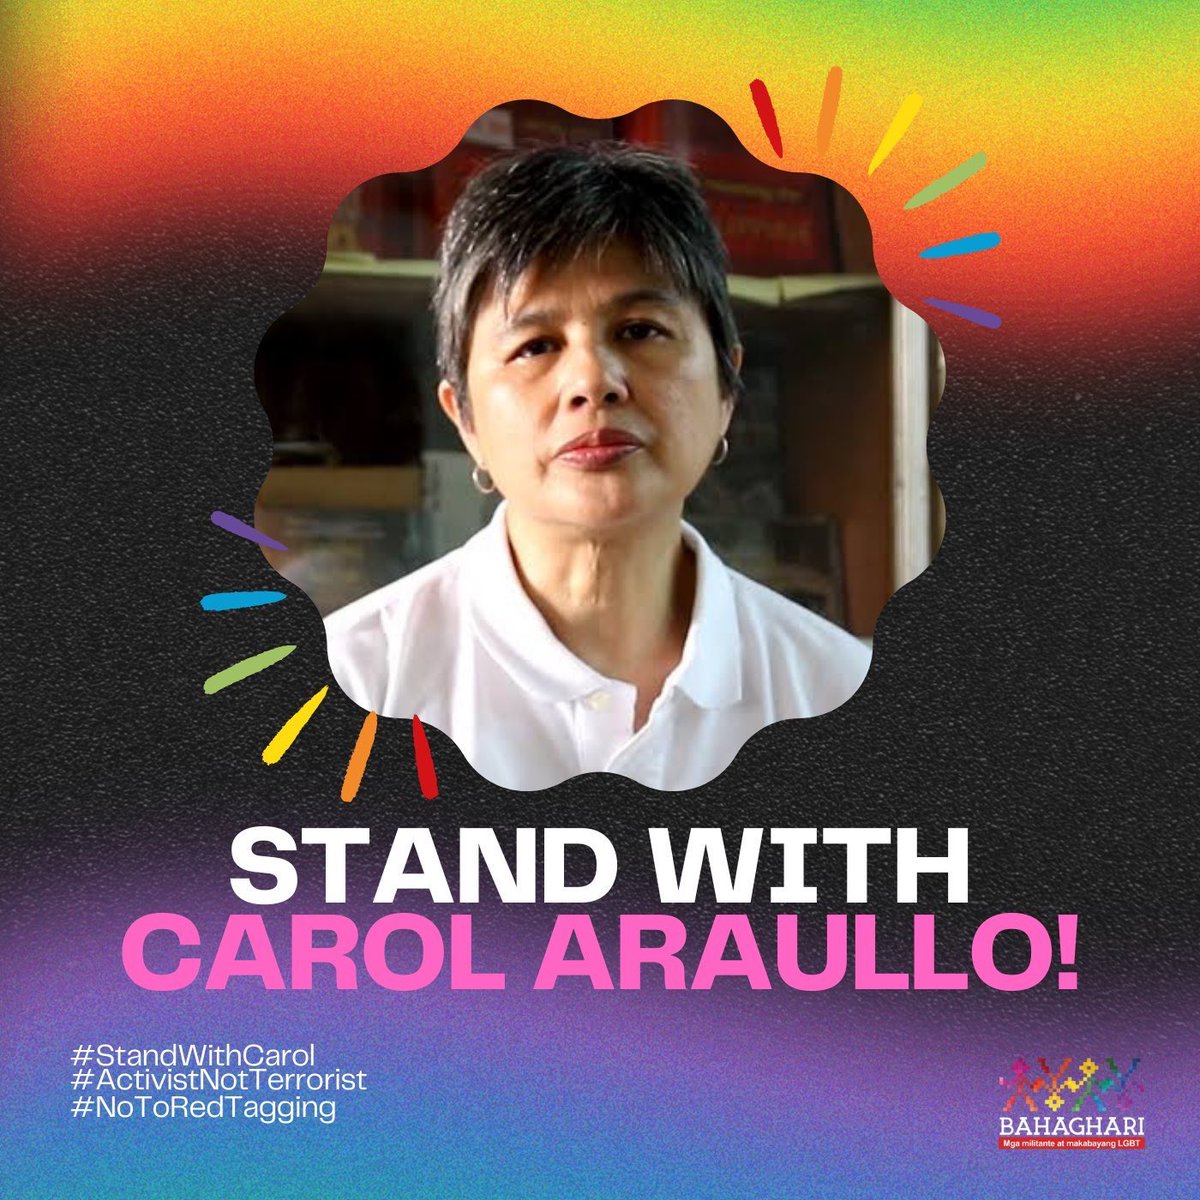 BAHAGHARI STANDS WITH DR. CAROL ARAULLO! NO TO RED-TAGGING!

Bahaghari stands with Dr. Carol P. Araullo in her civil case against the pathological red-taggers and admin sycophants Lorraine Badoy-Partosa and Jeffrey Celiz.

#StandWithCarol
#ActivistsNotTerrorists
#NoToRedtagging